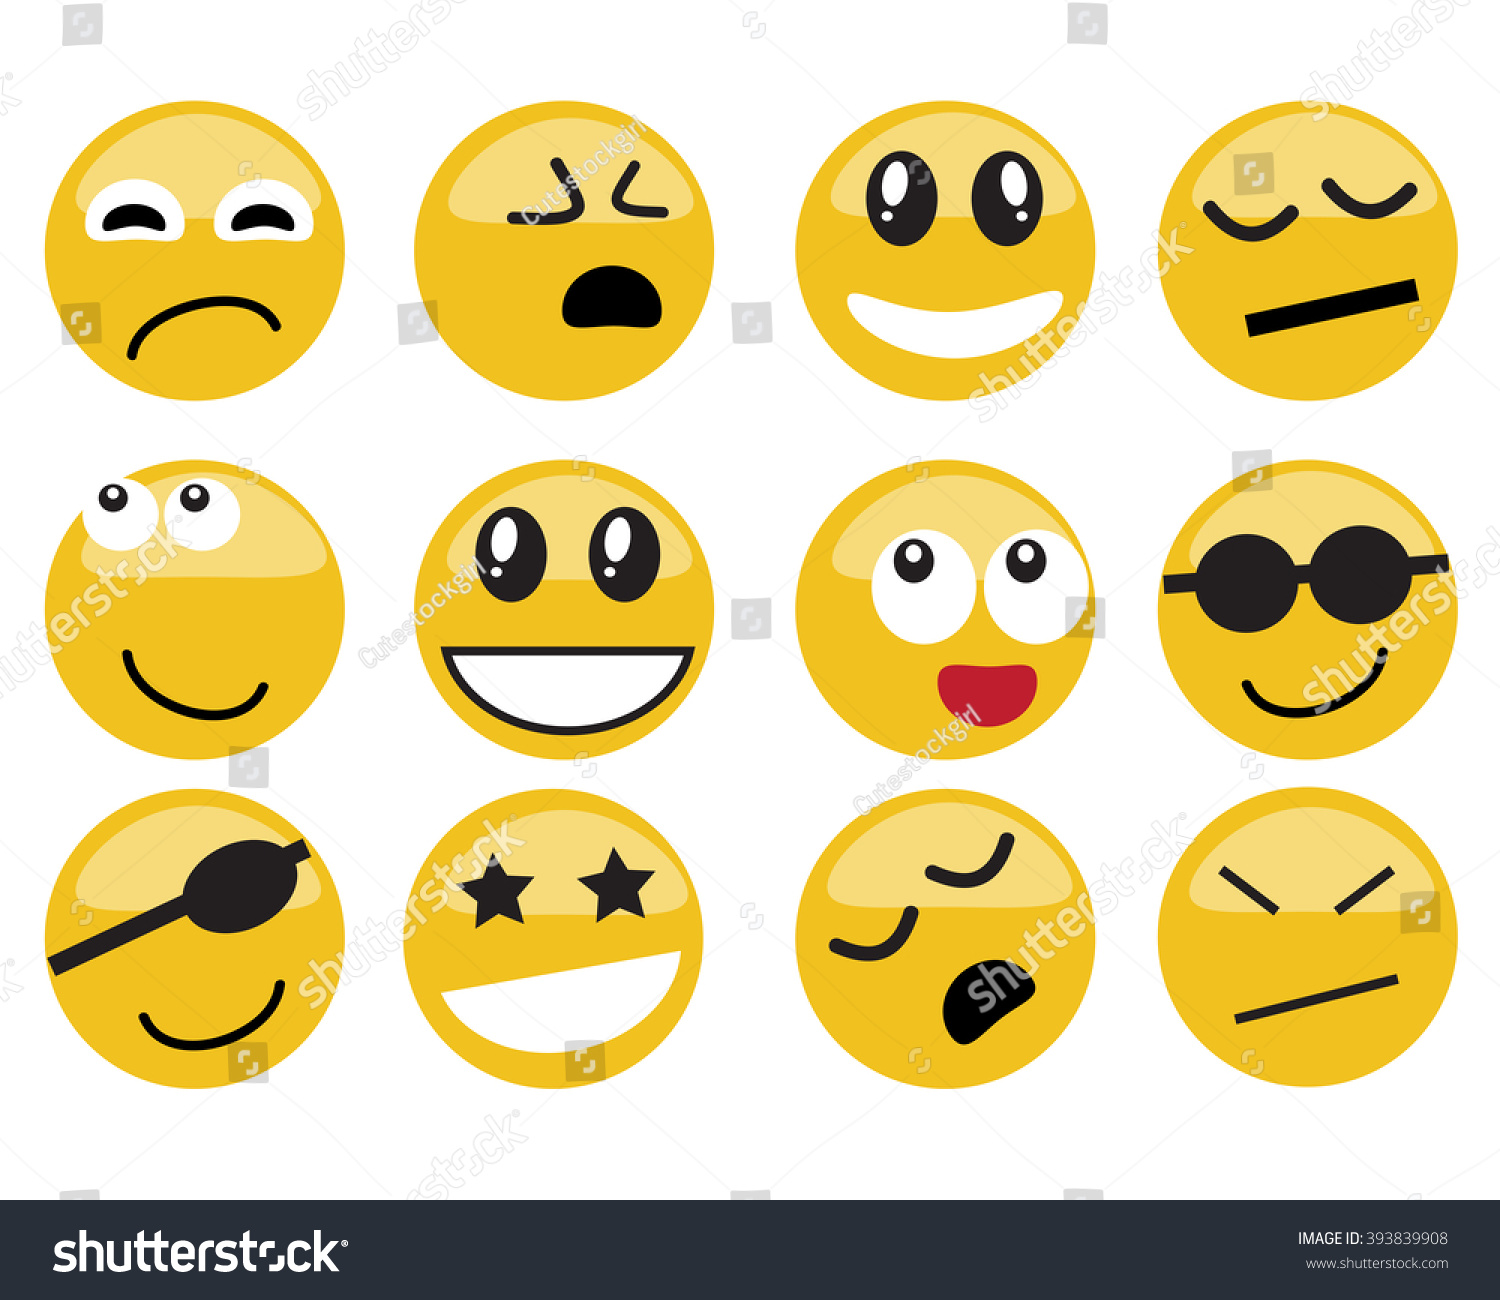 Emoticon. Vector Style Smile Face Icons - 393839908 : Shutterstock